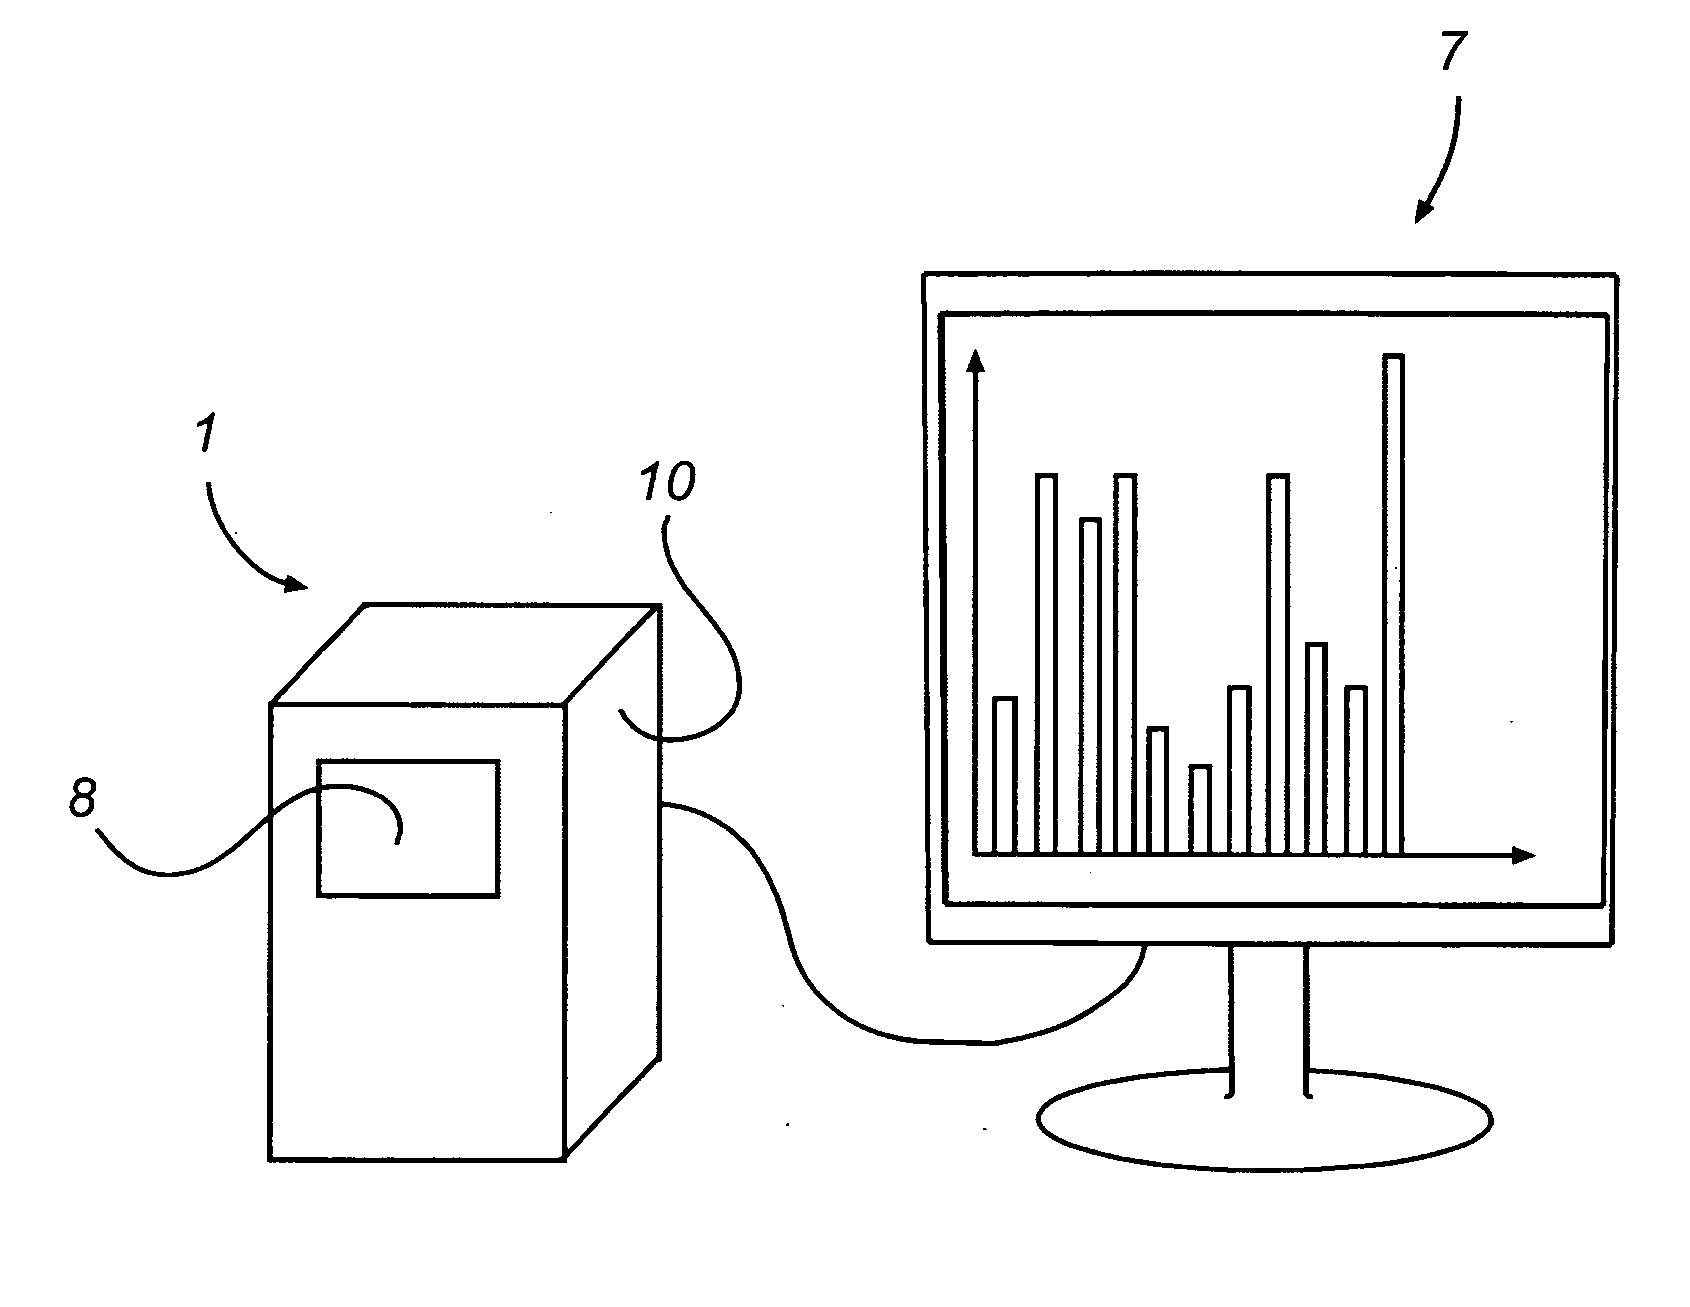 Apparatus and method for x-ray fluorescence analysis of a mineral sample